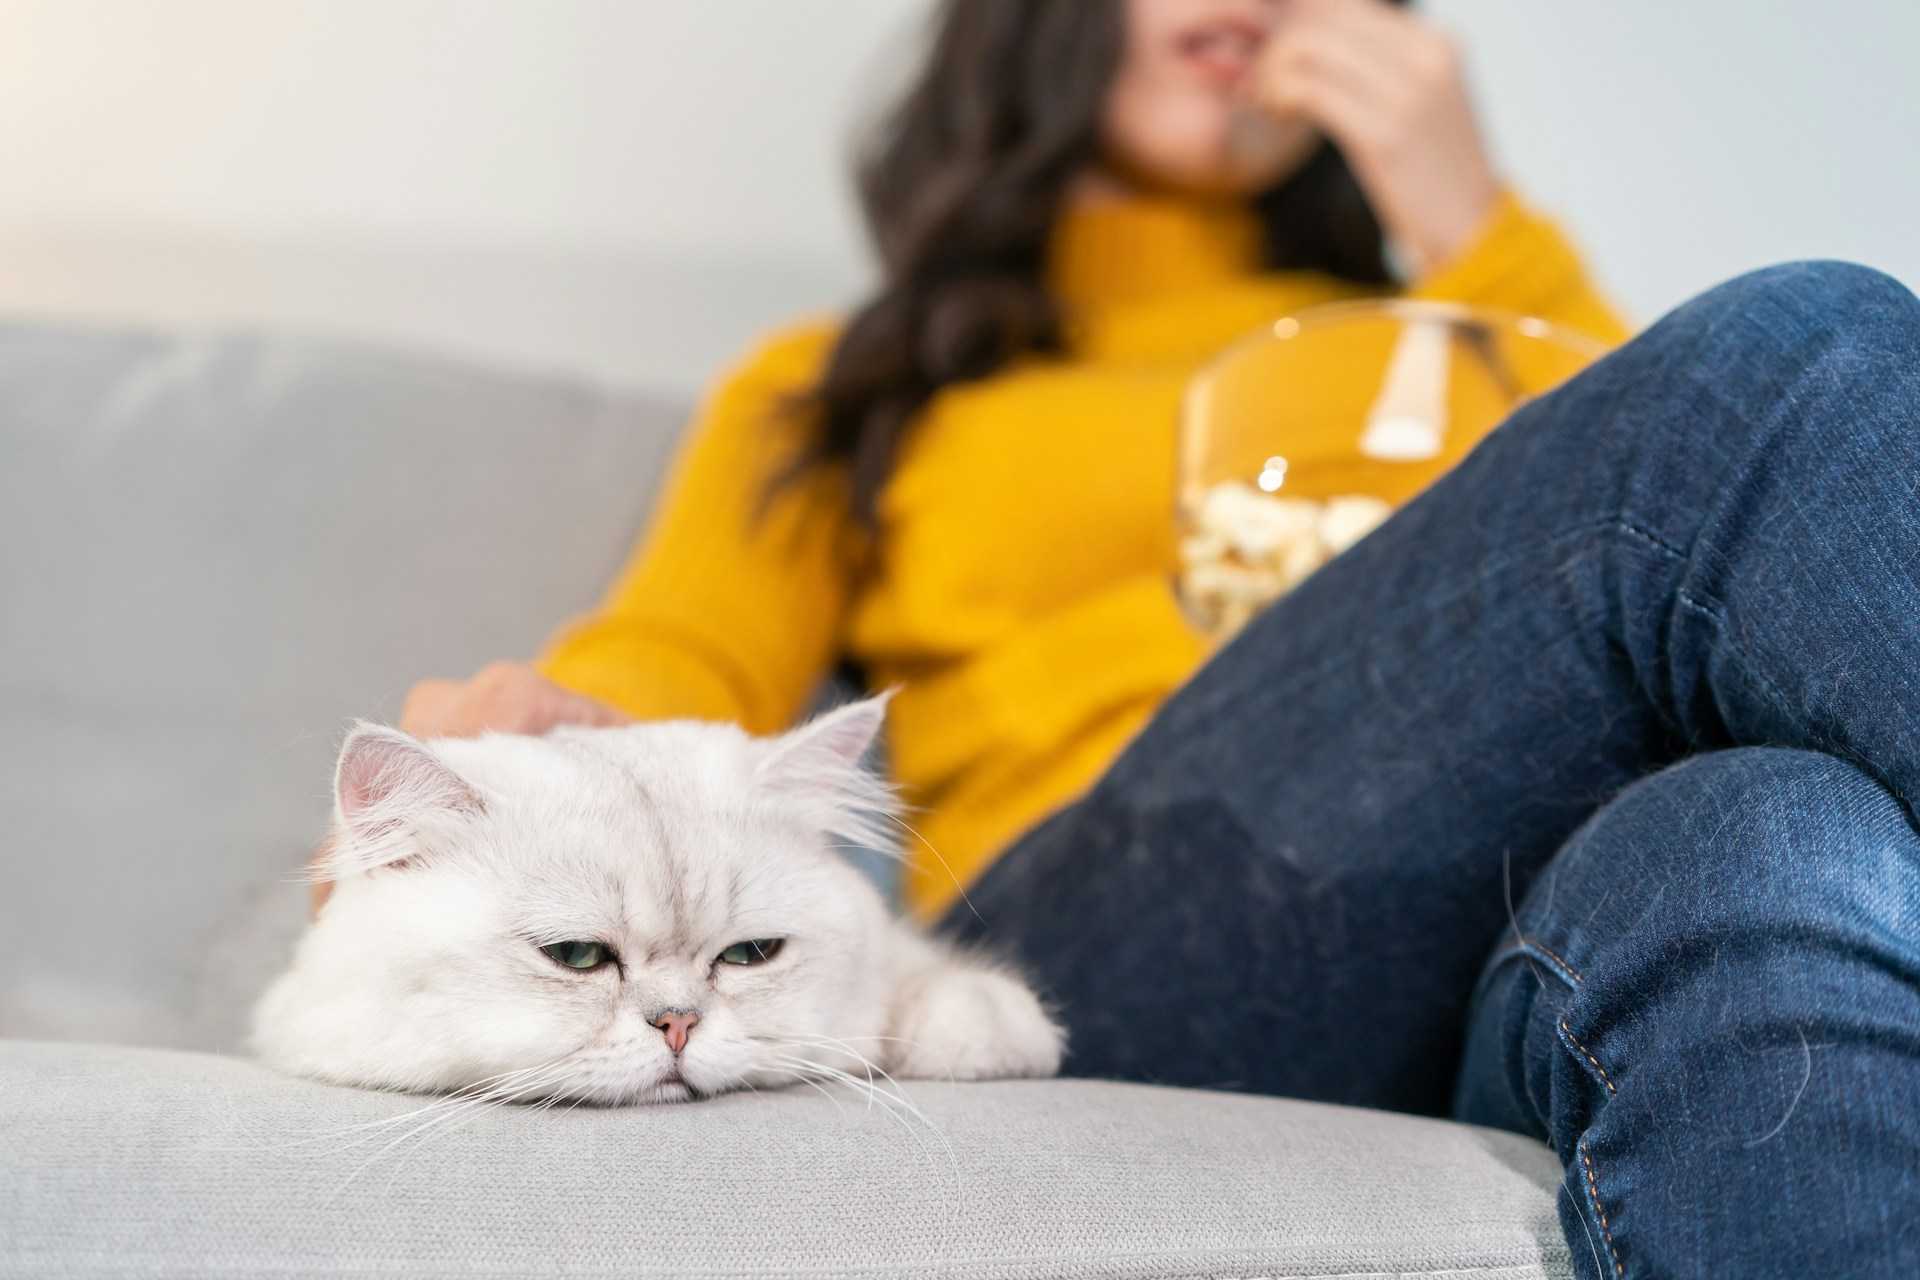 A depressed cat sitting on a couch next to a woman